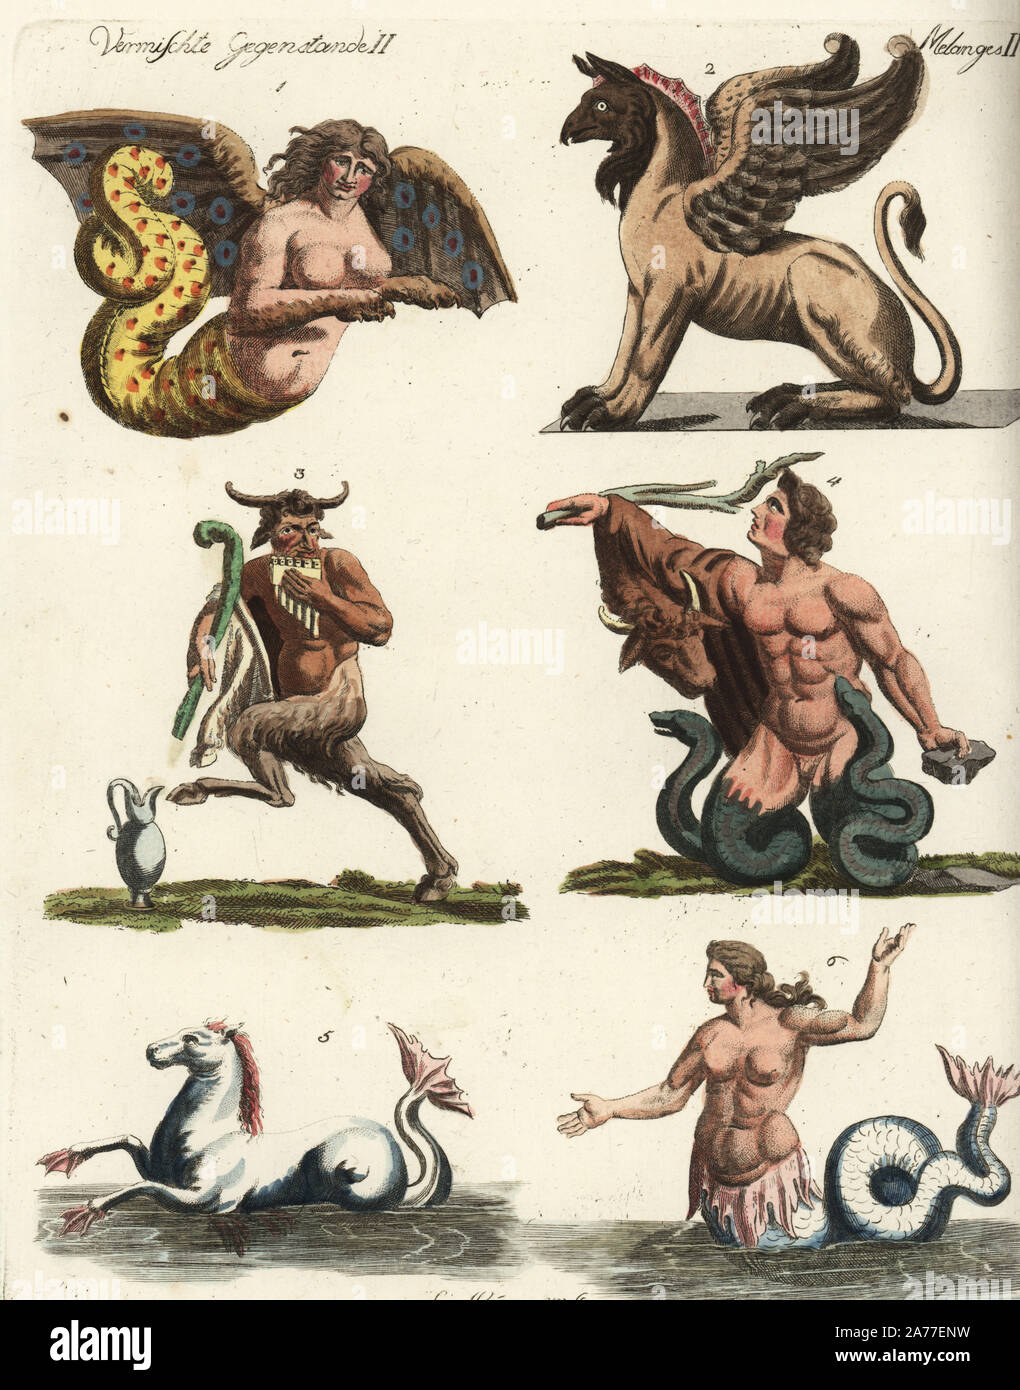 Mythical creatures: harpy, griffin, satyr, giant or Titan, seahorse and Nereid or Triton. Handcoloured copperplate engraving after Christiane Henriette Dorothea Westermayr from Friedrich Johann Bertuch's Bilderbuch fur Kinder (Picture Book for Children), Weimar, 1792. Stock Photo